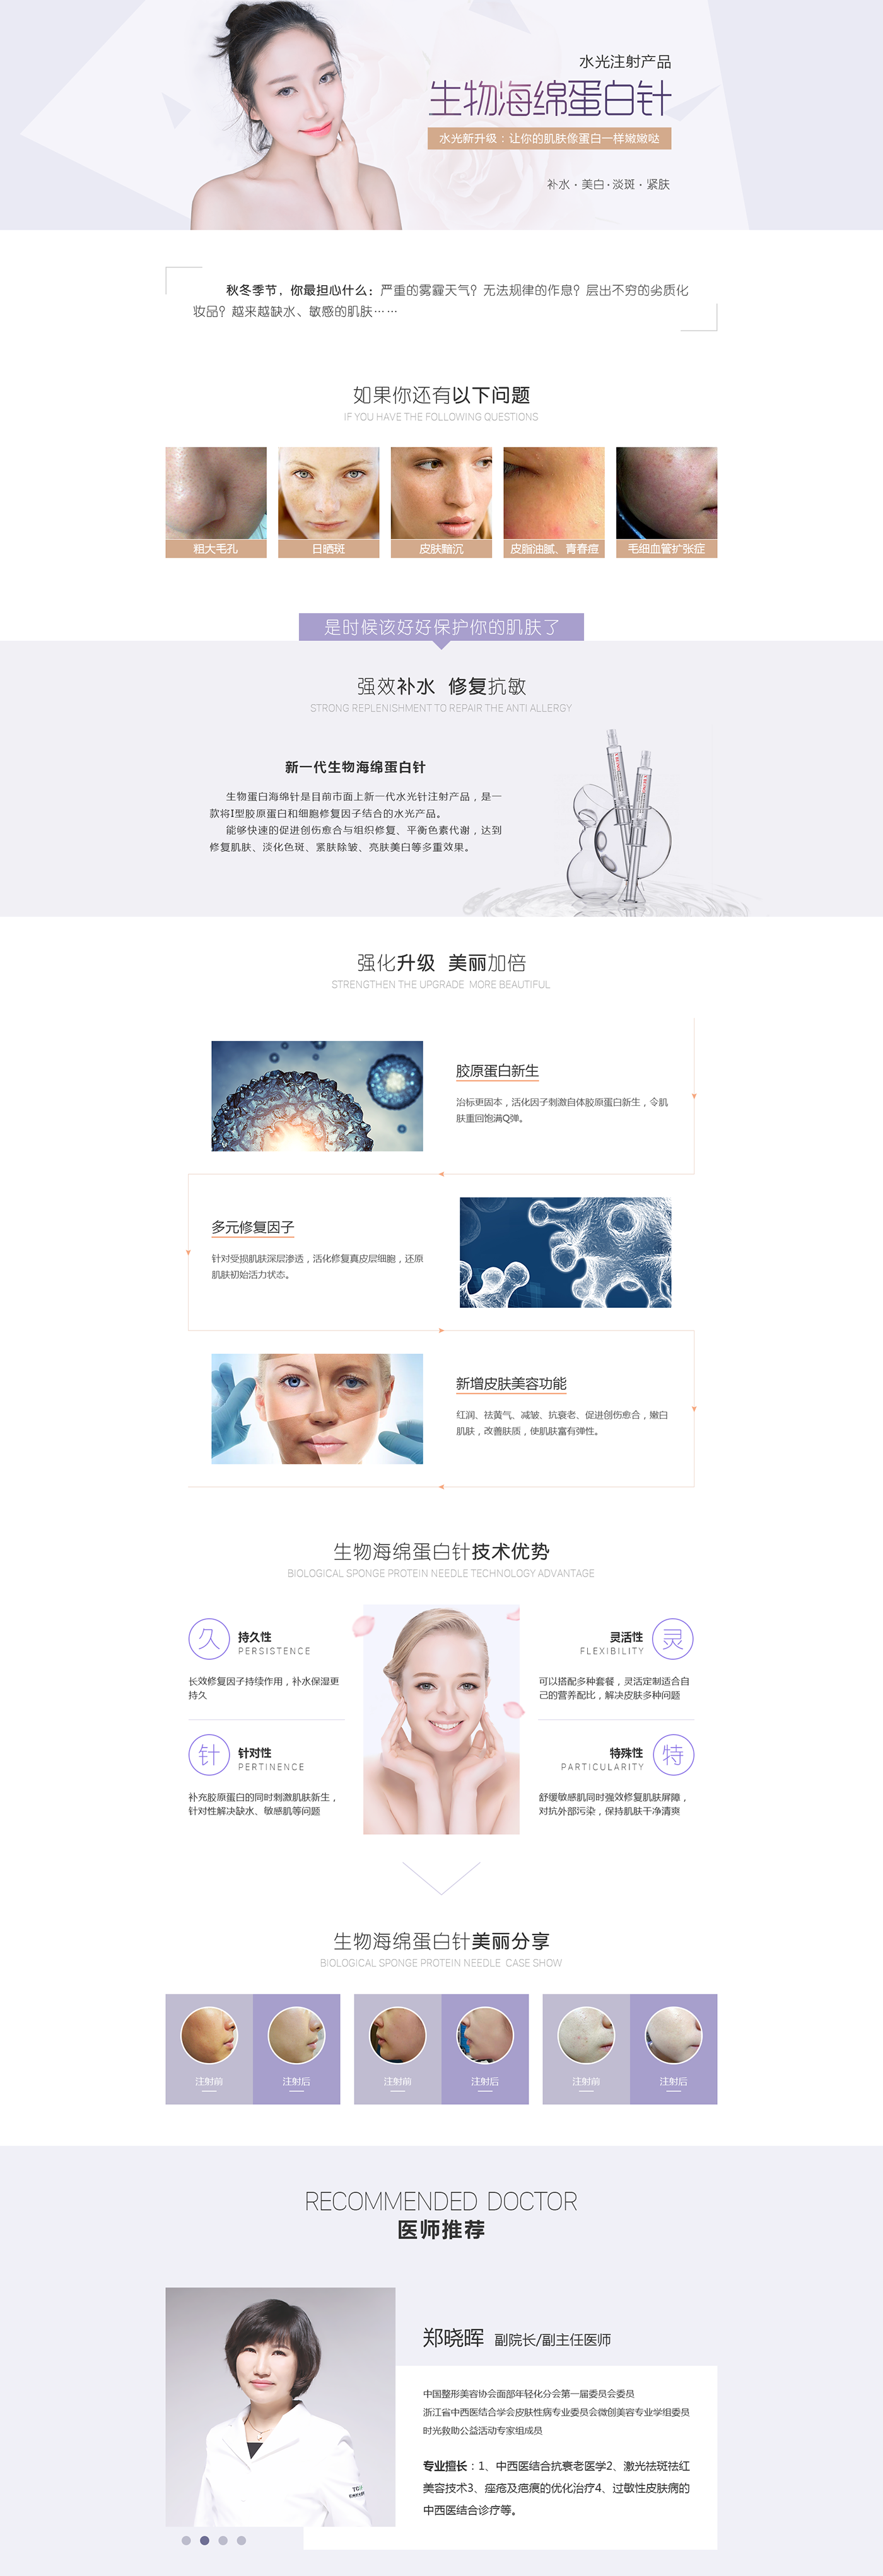 Medical beauty page